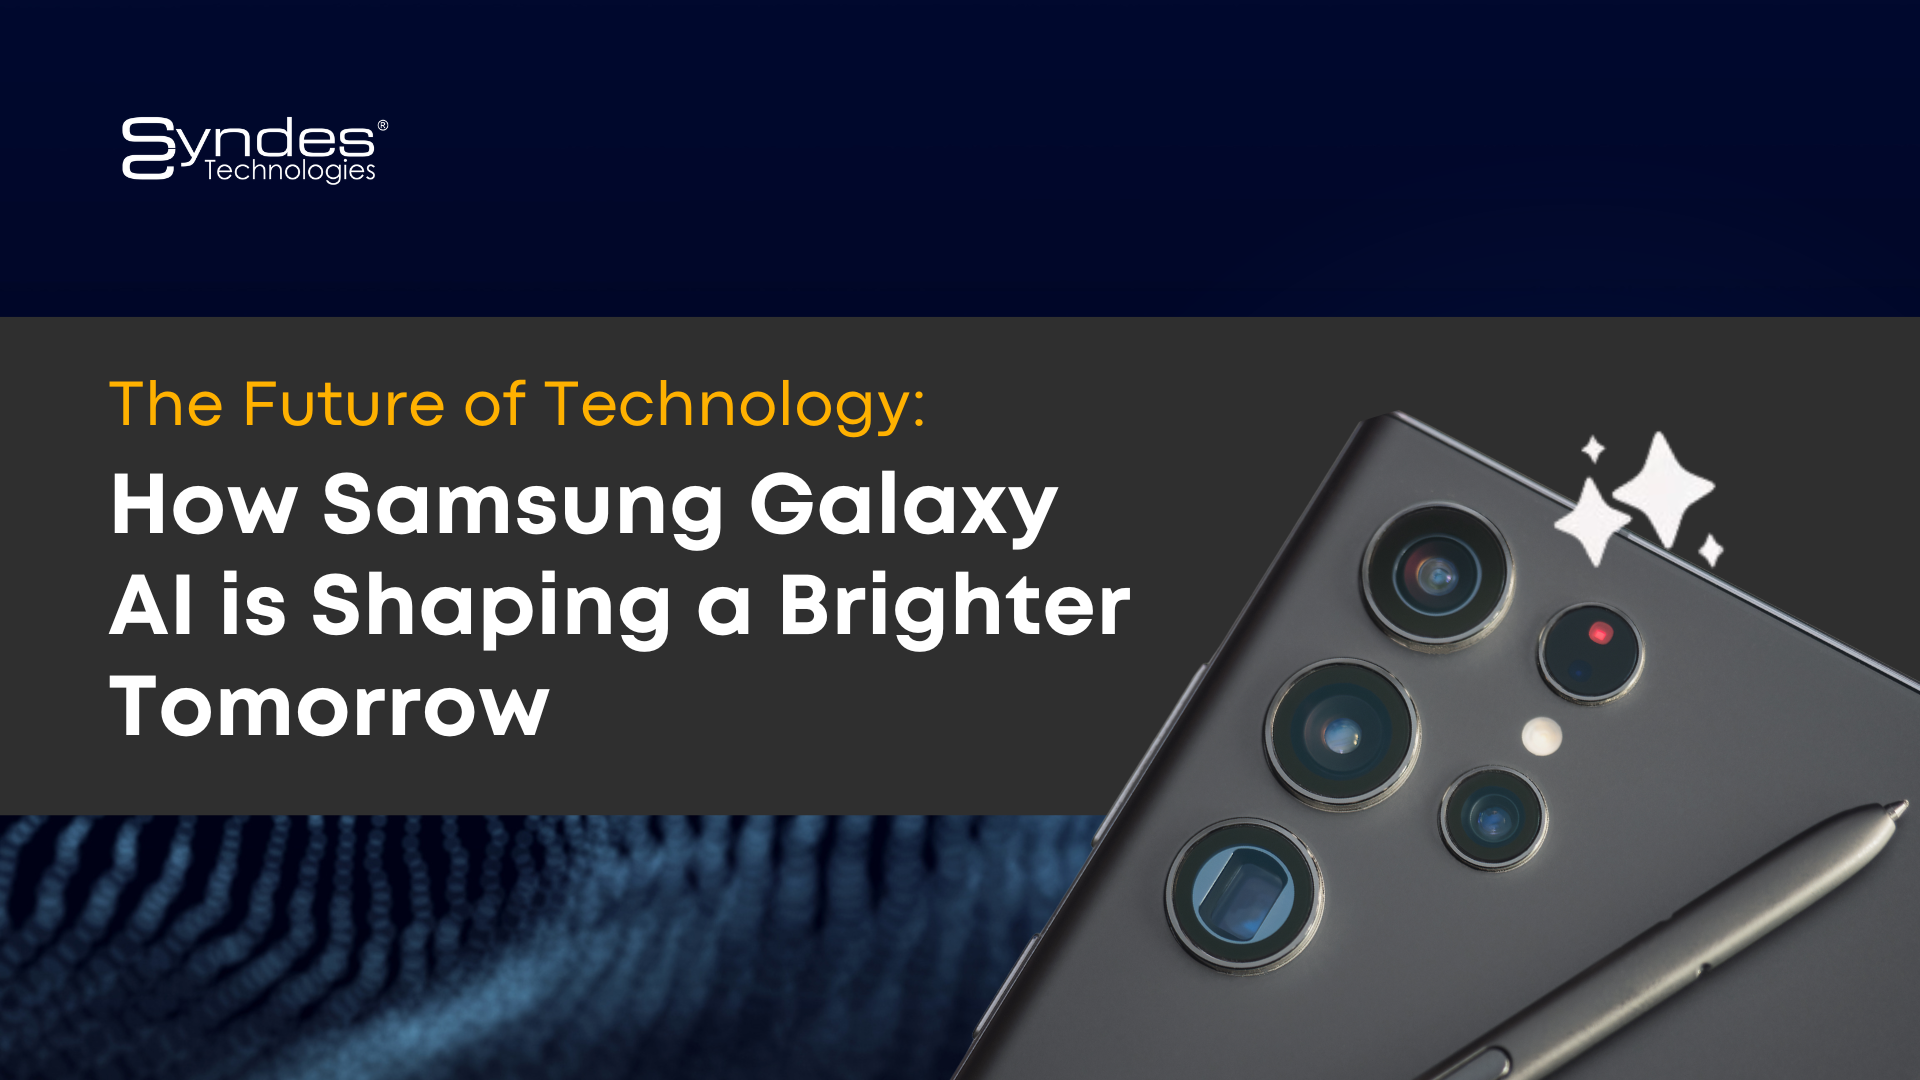 The Future of Technology: How Samsung Galaxy AI is Shaping a Brighter Tomorrow